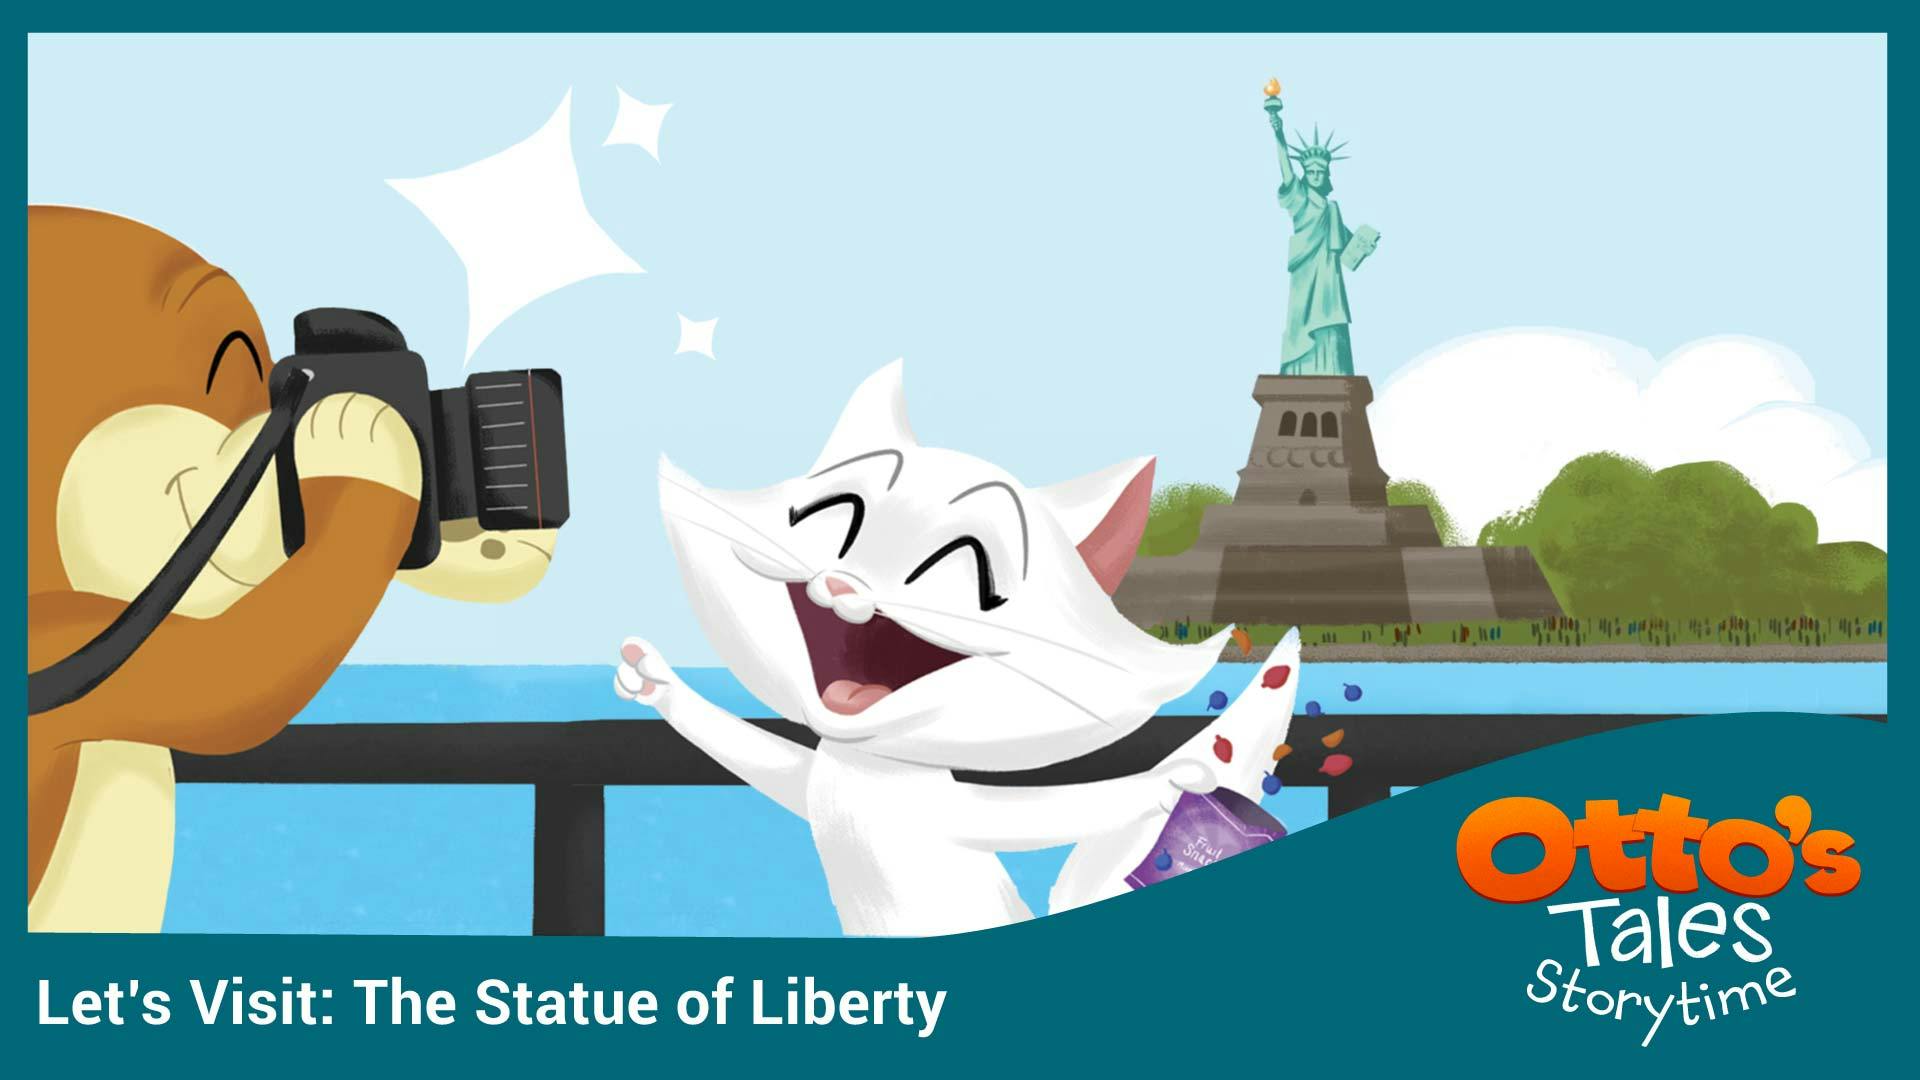 Let's Visit the Statue of Liberty